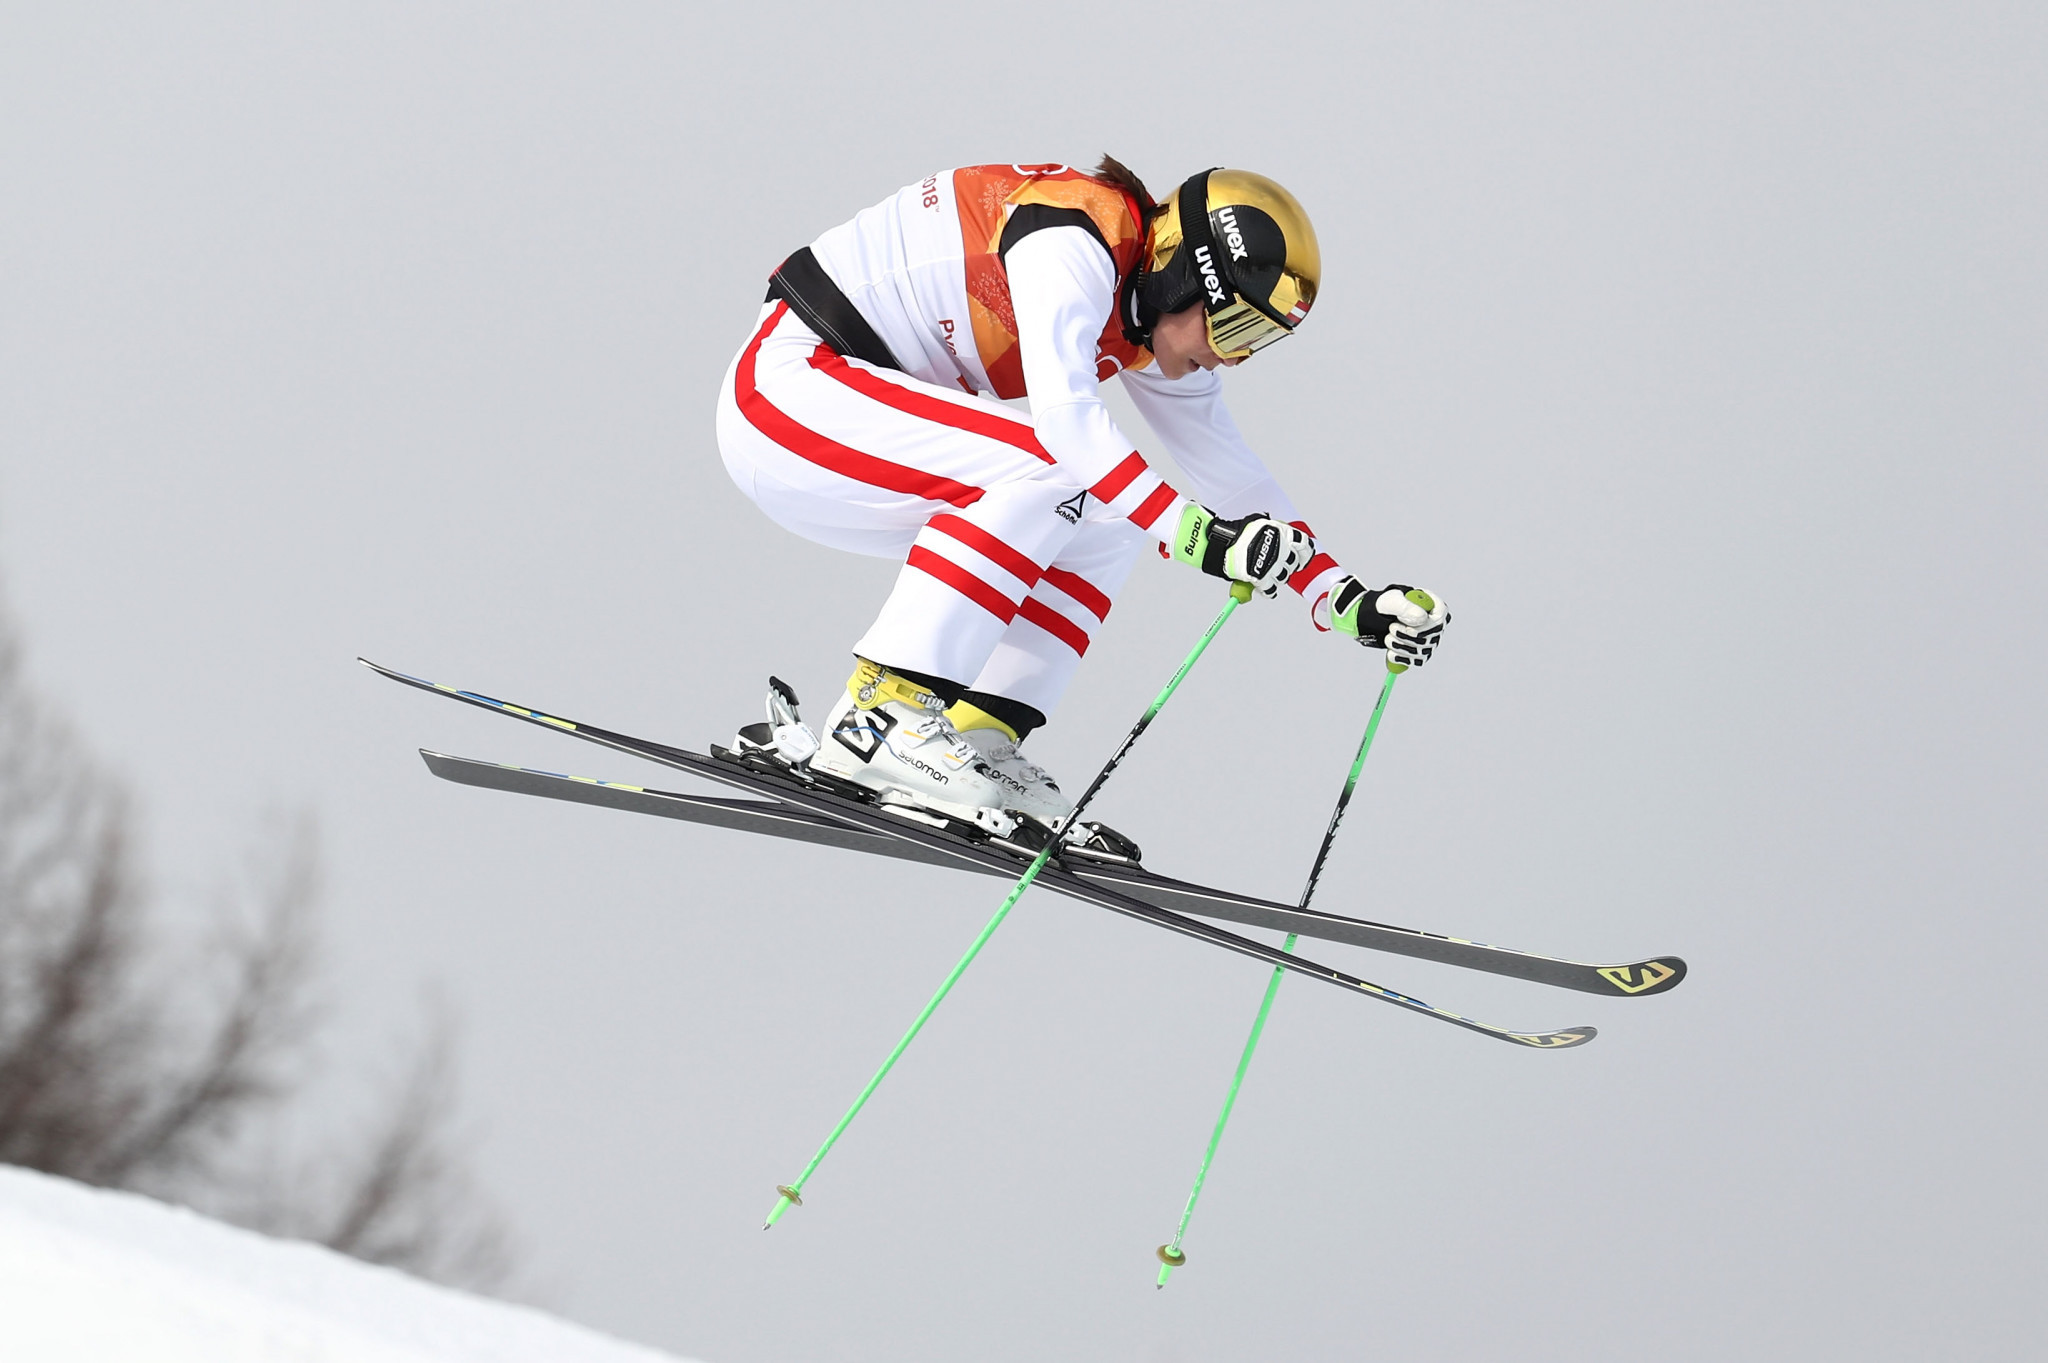 Katrin Ofner claimed her first ski cross World Cup victory in her 128th start and 13th season on the tour ©Getty Images